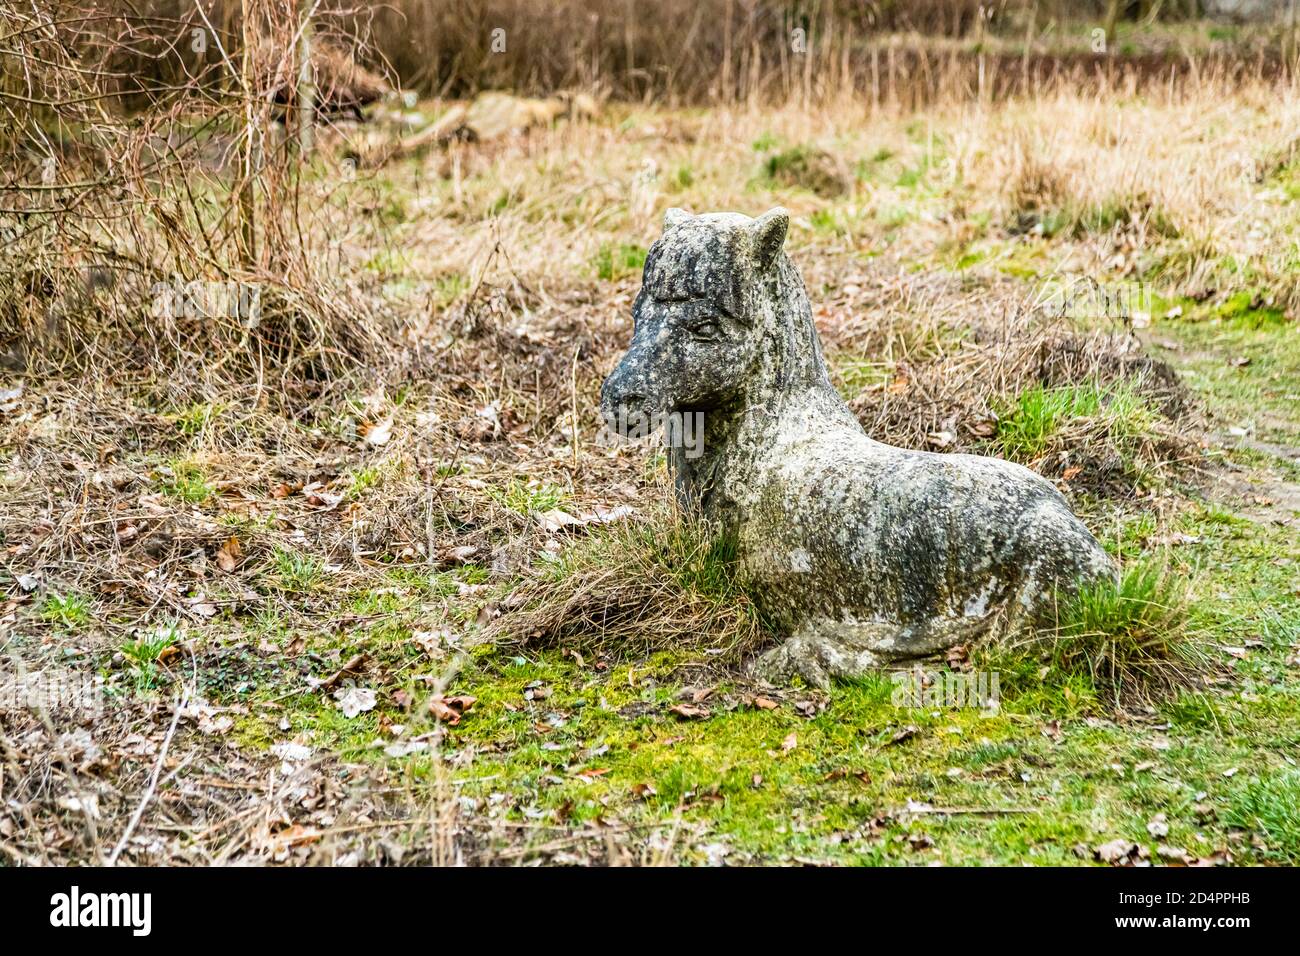 Weathered fairy tale animal figure made of concrete in Röbel-Müritz, Germany Stock Photo